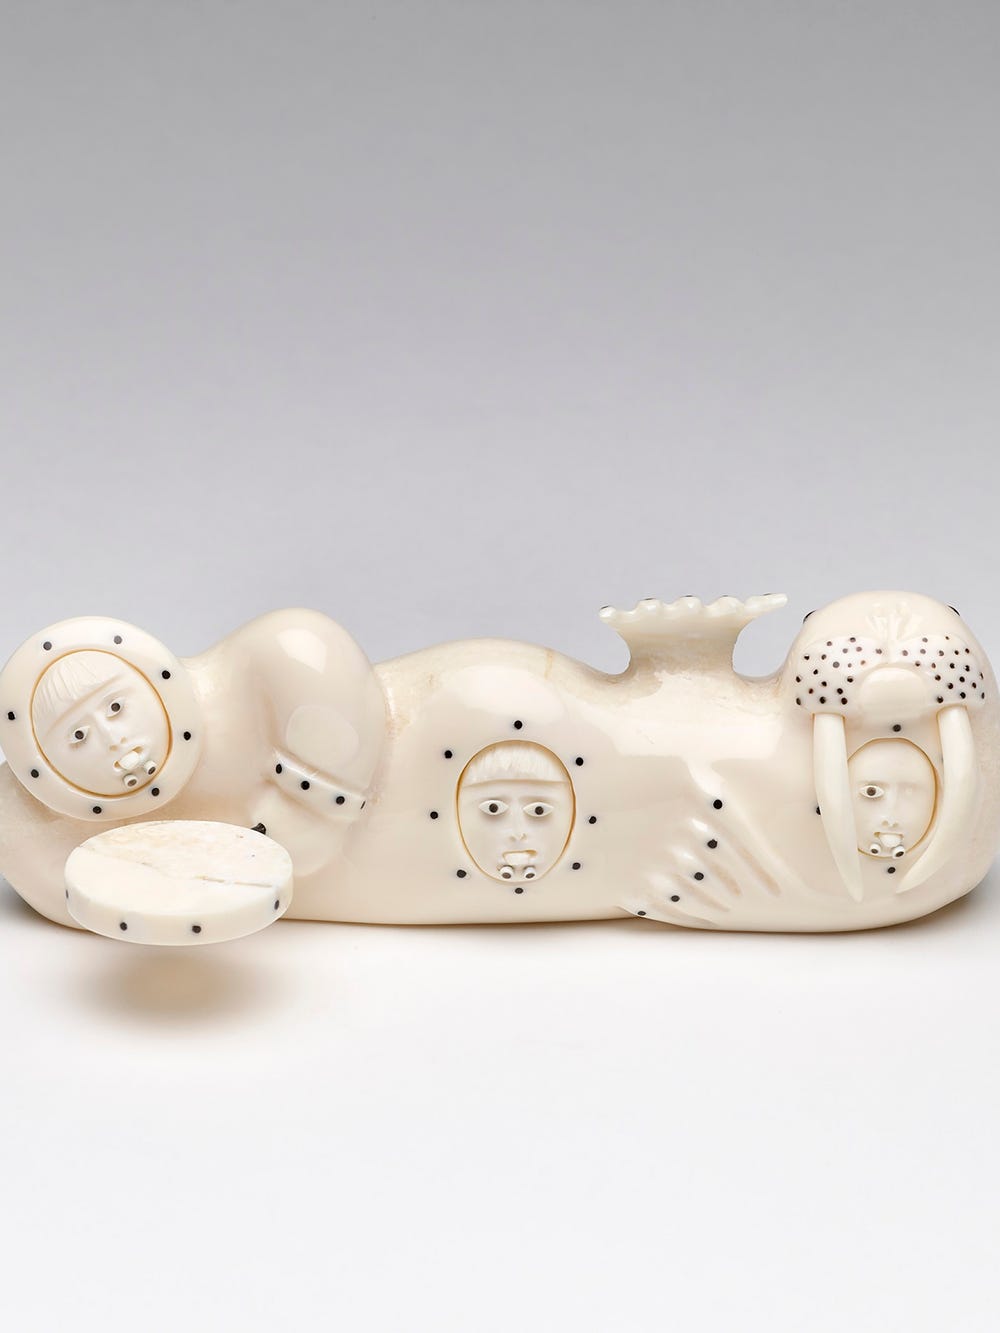 Figurine that is both a drummer and walrus with three faces looking out of their belly